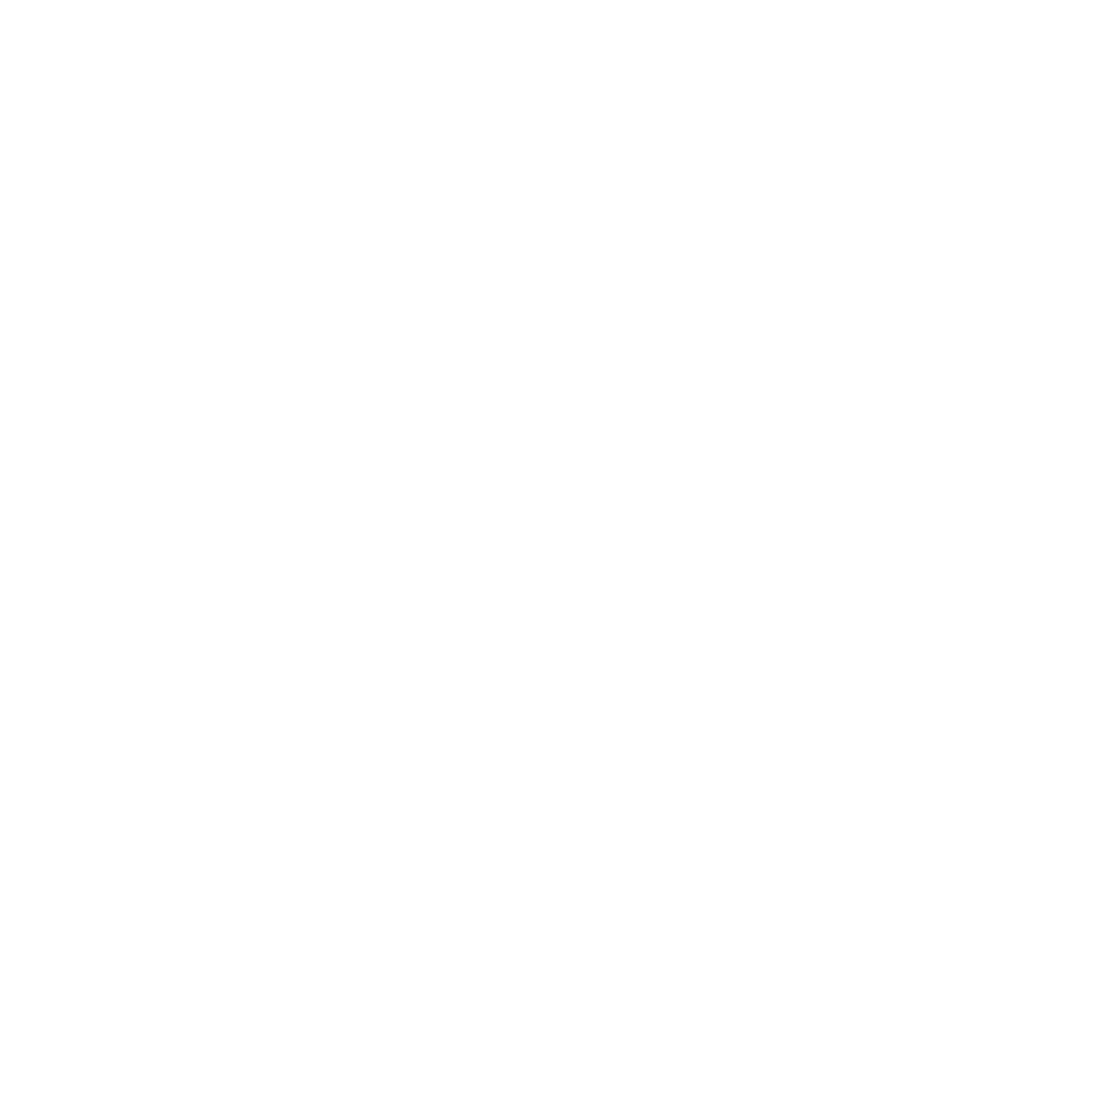 Develop a hotline that Black immigrants can access for support